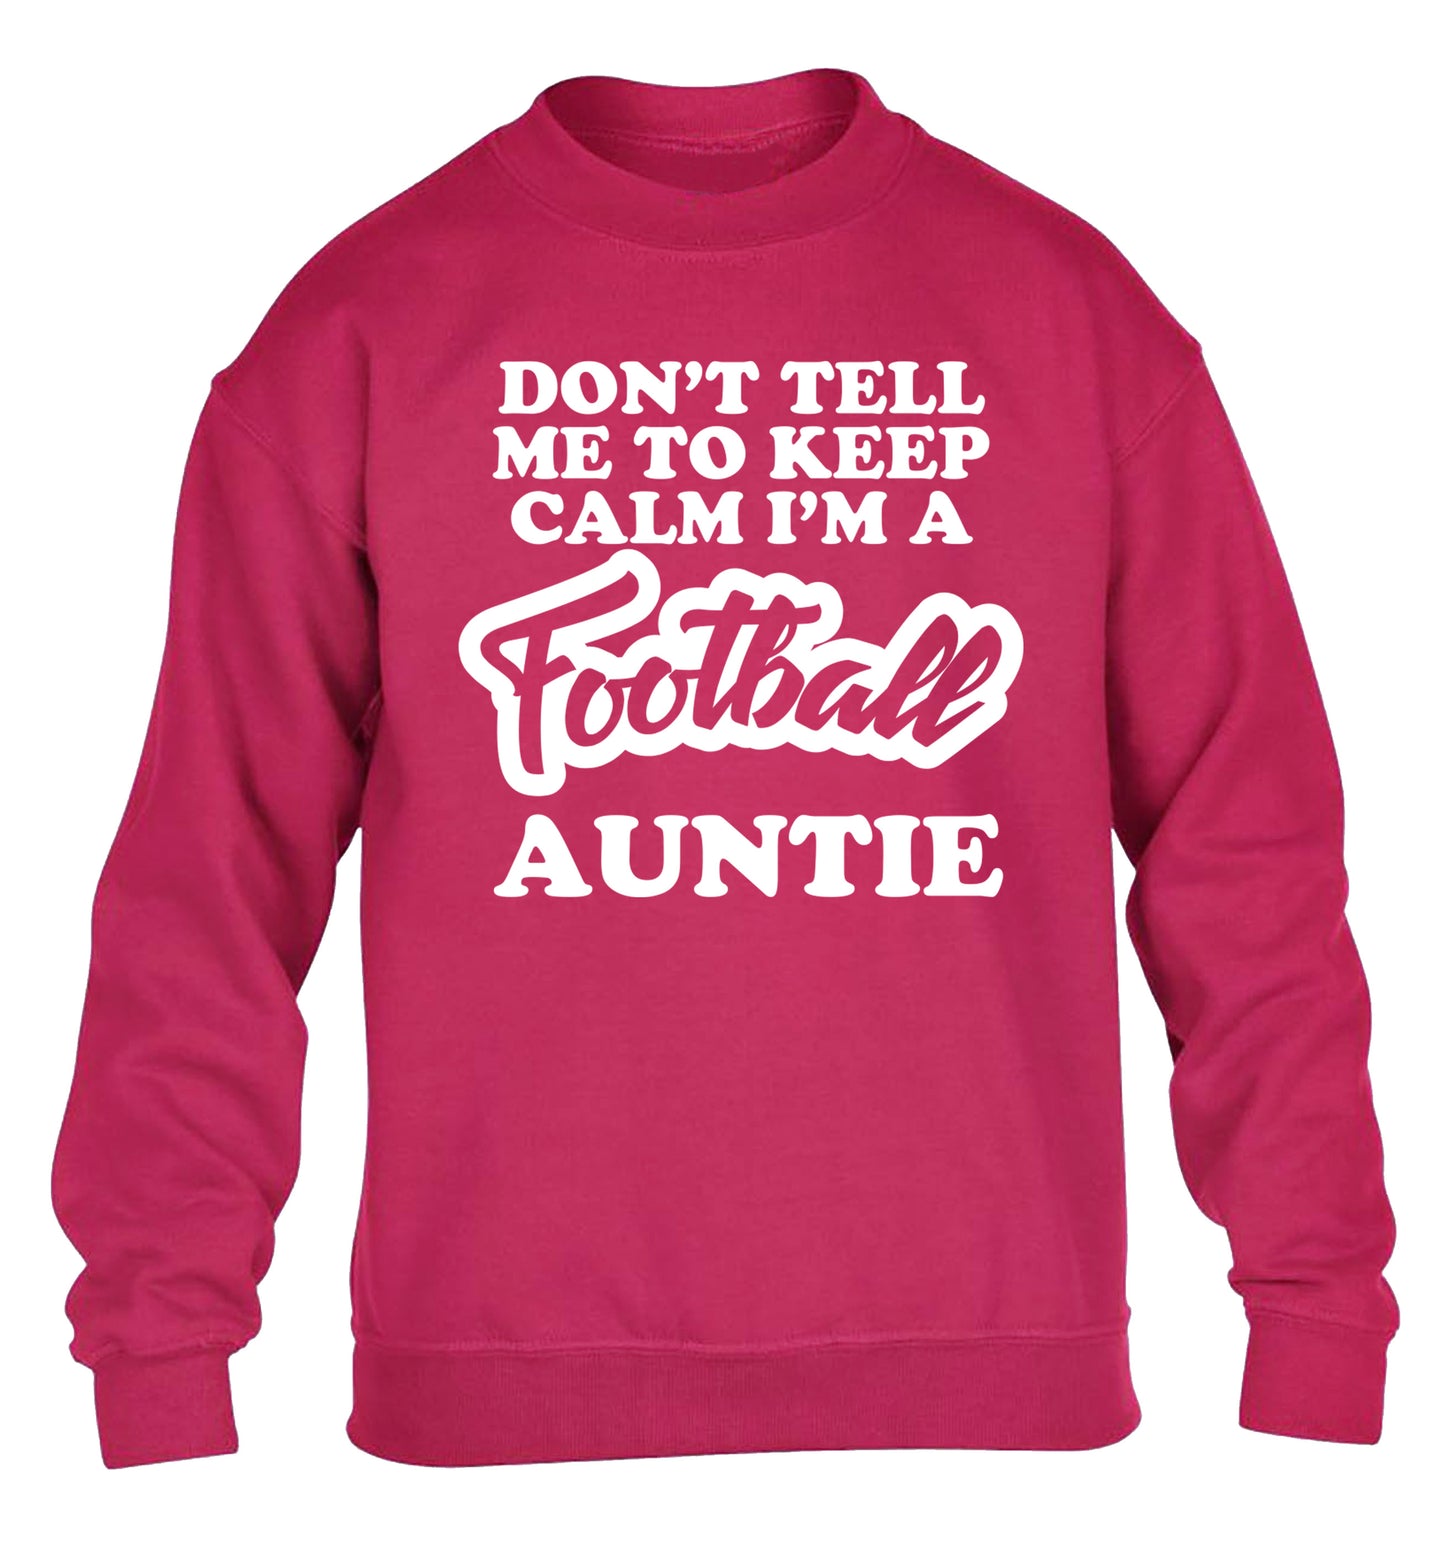 Don't tell me to keep calm I'm a football auntie children's pink sweater 12-14 Years